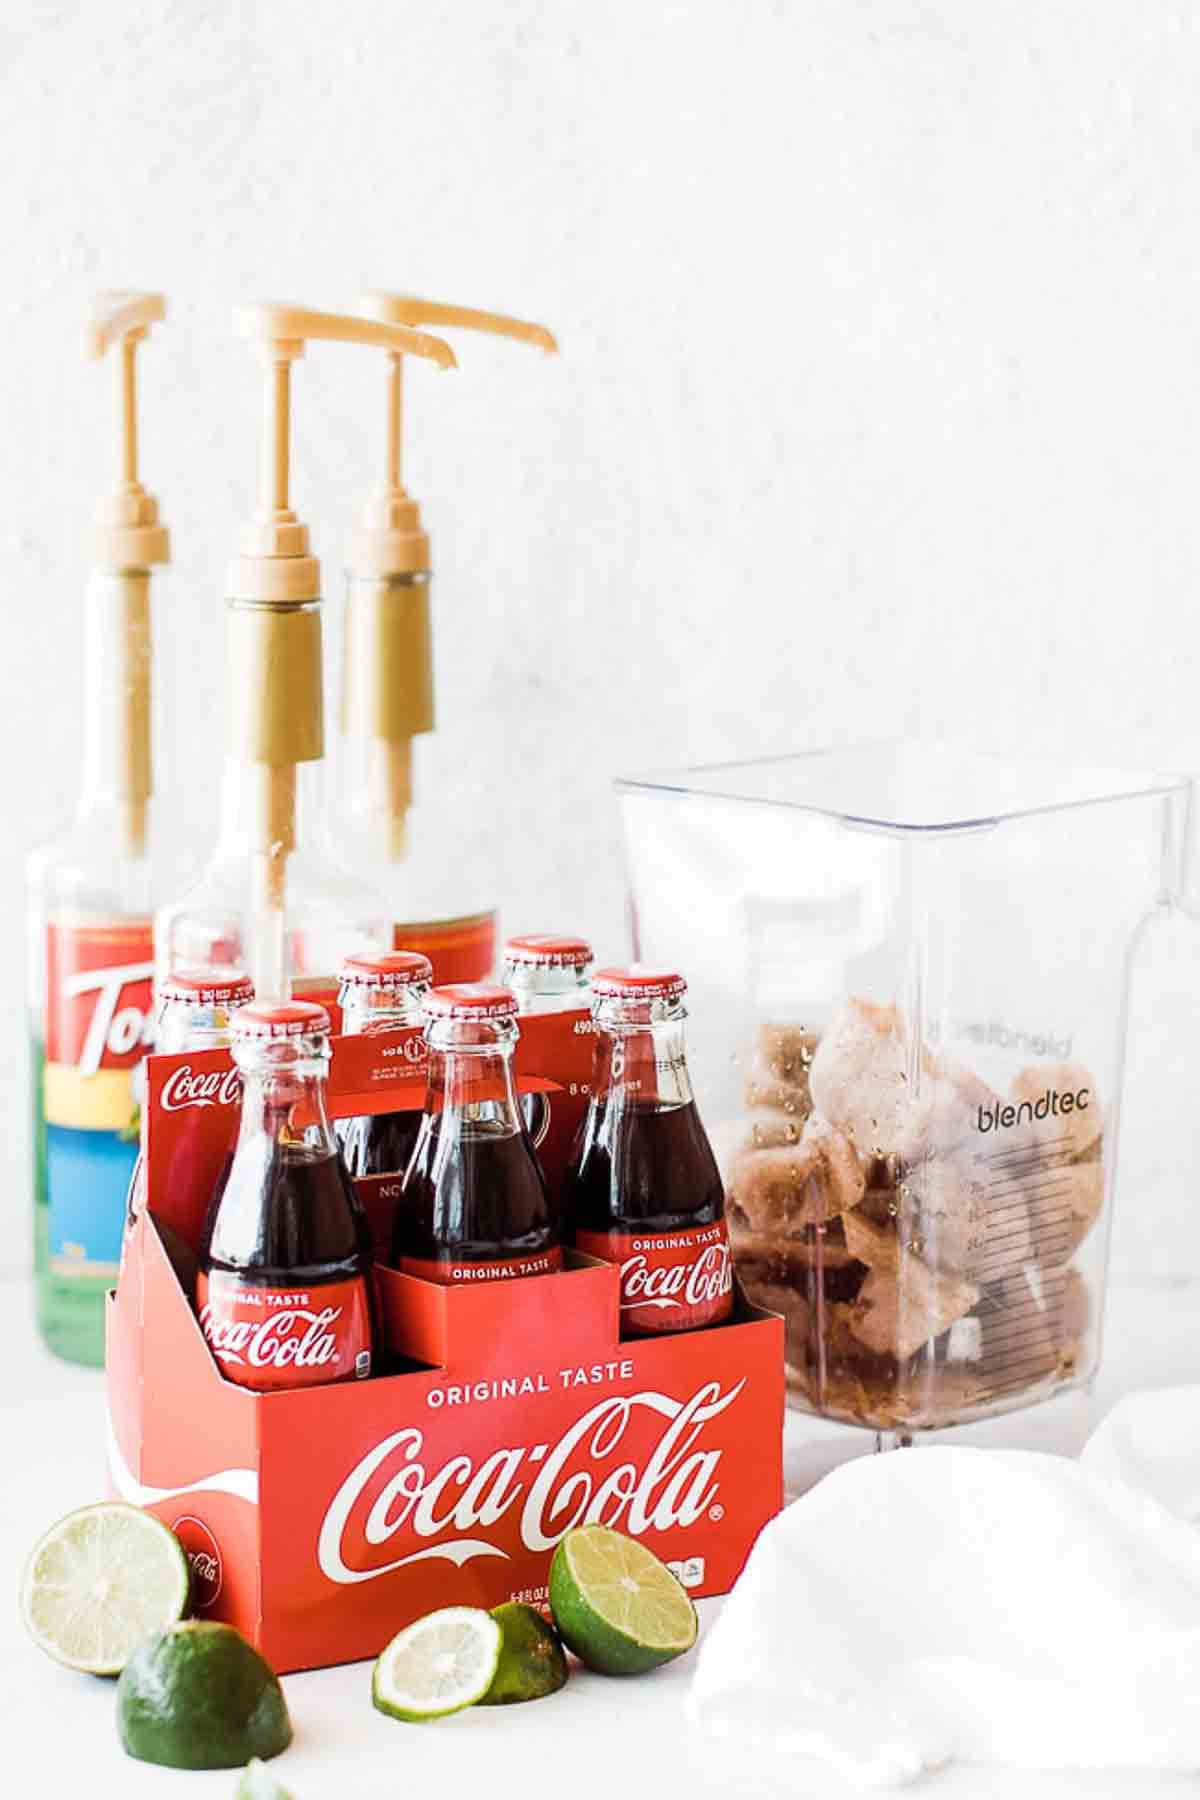 Ingredients to make frozen coke on the table.